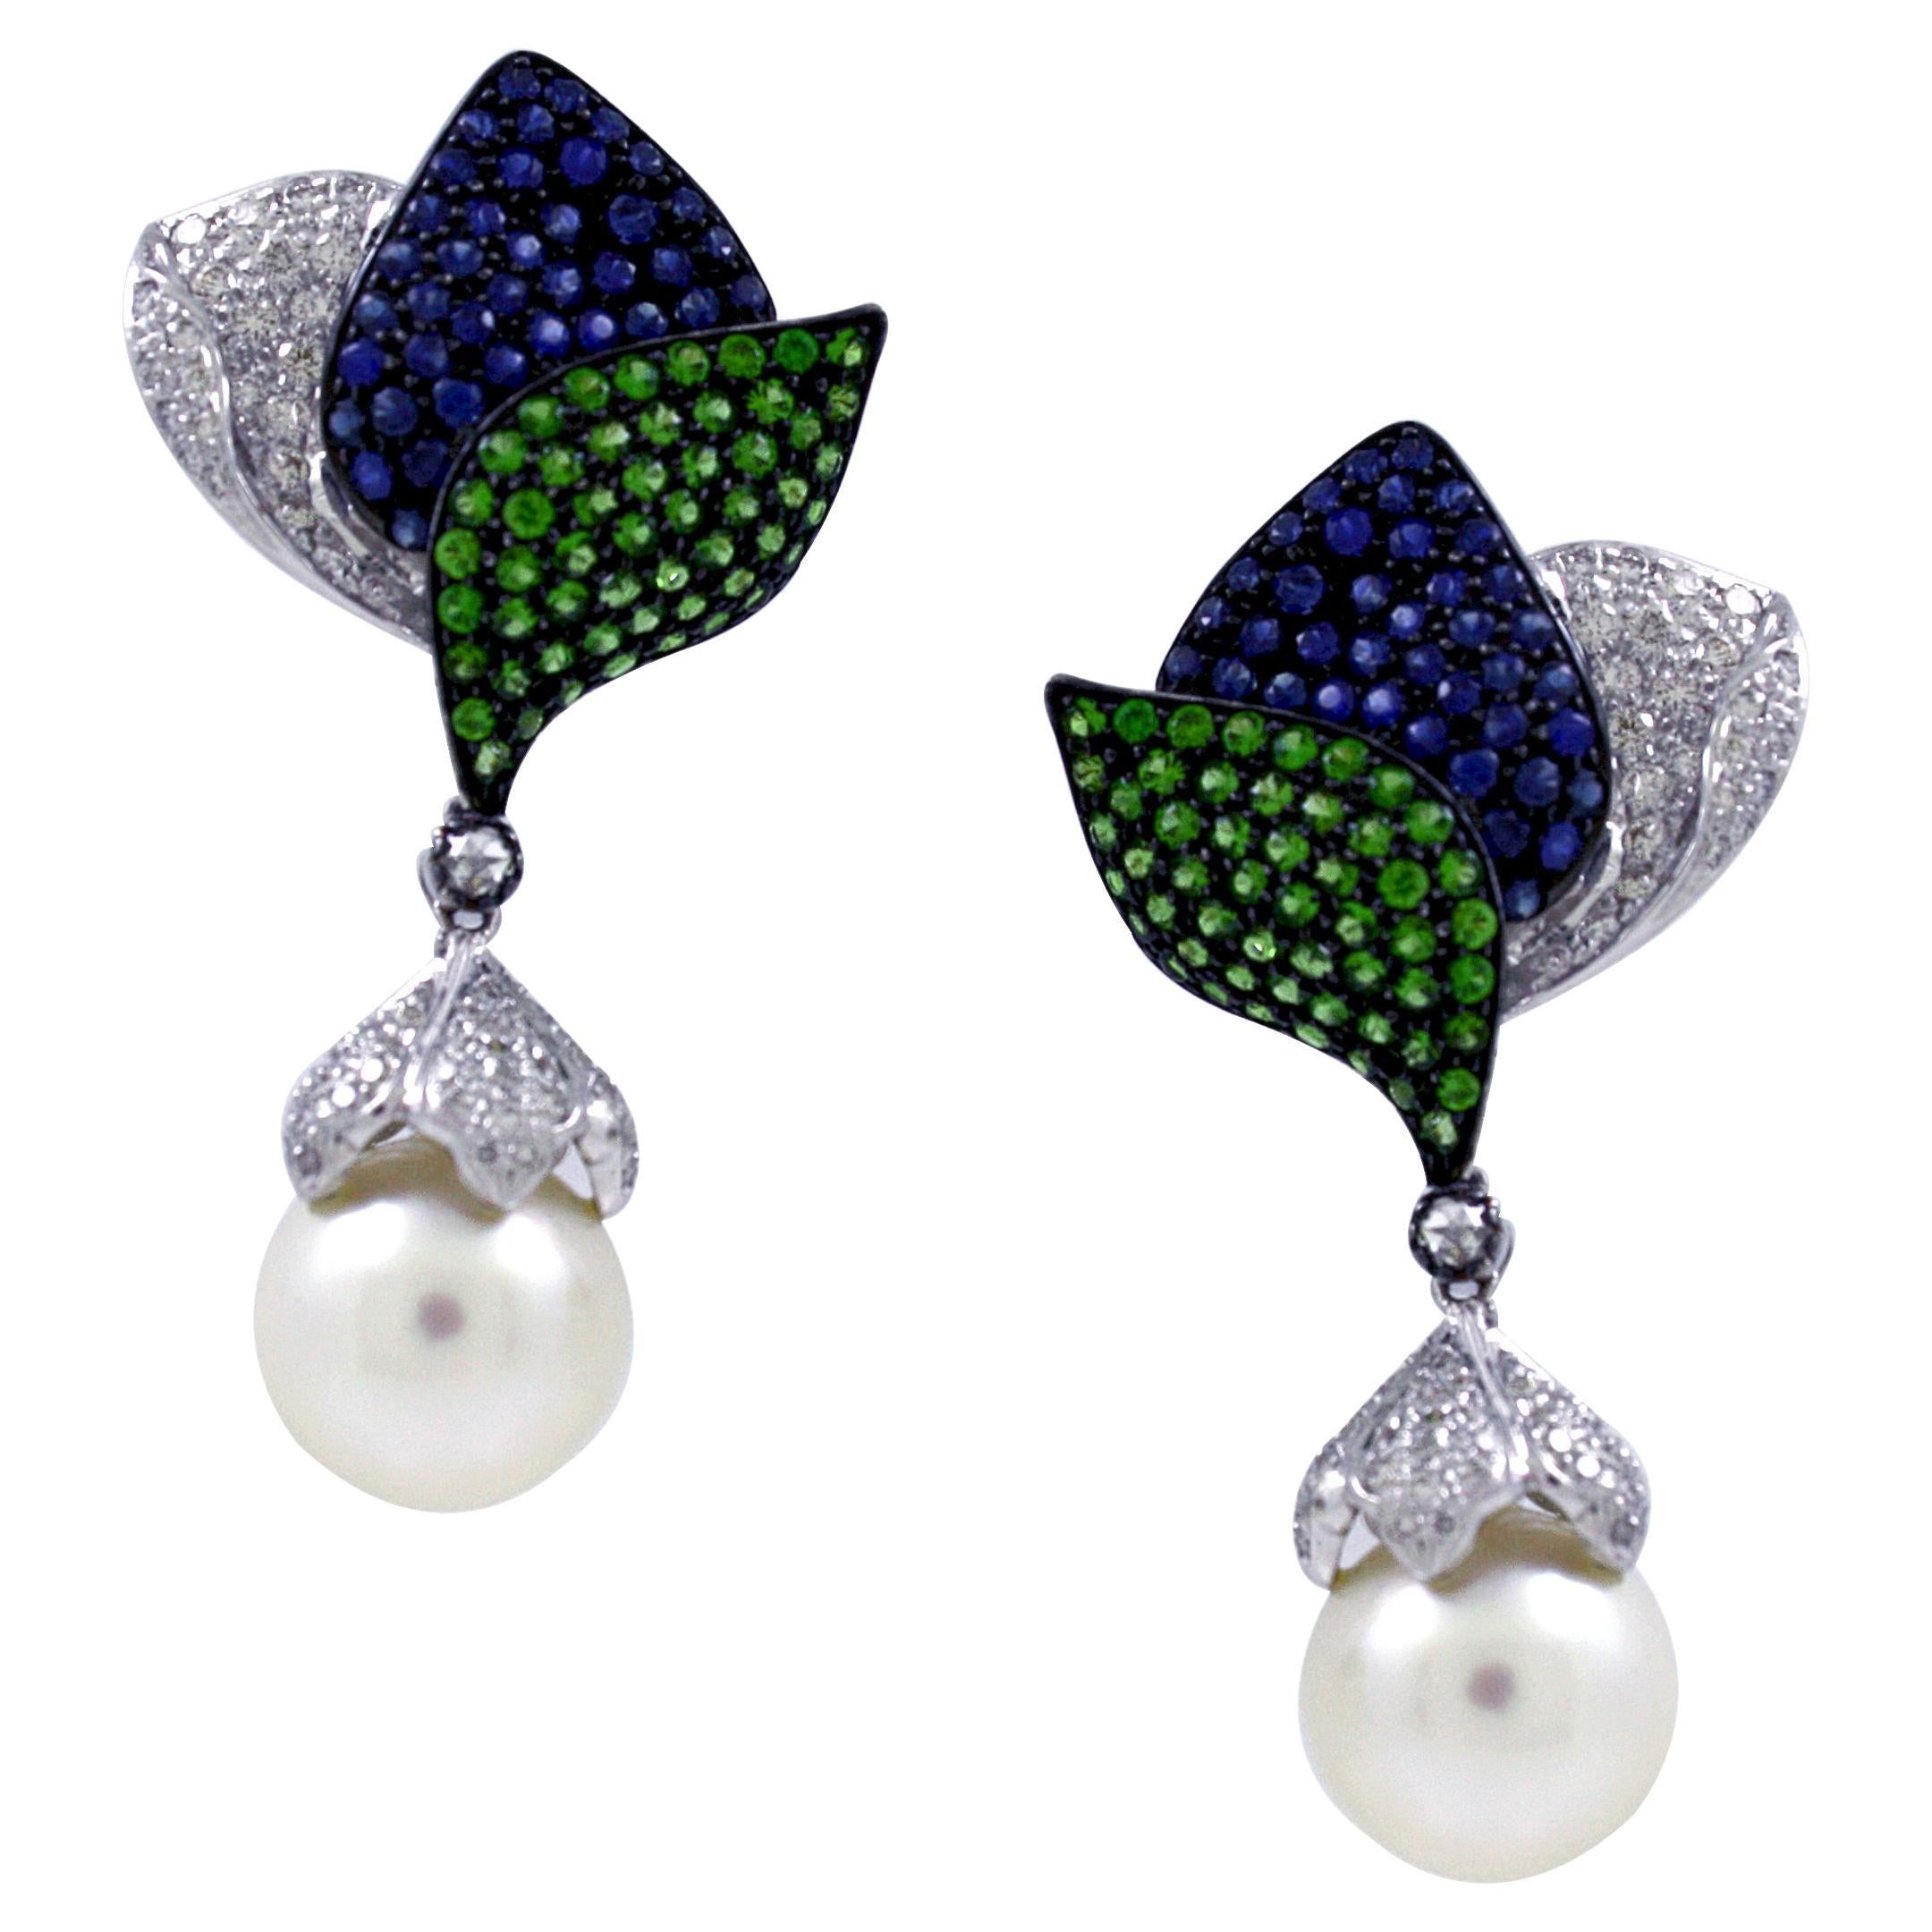 22.58 cts of Pearl Drop Earrings For Sale